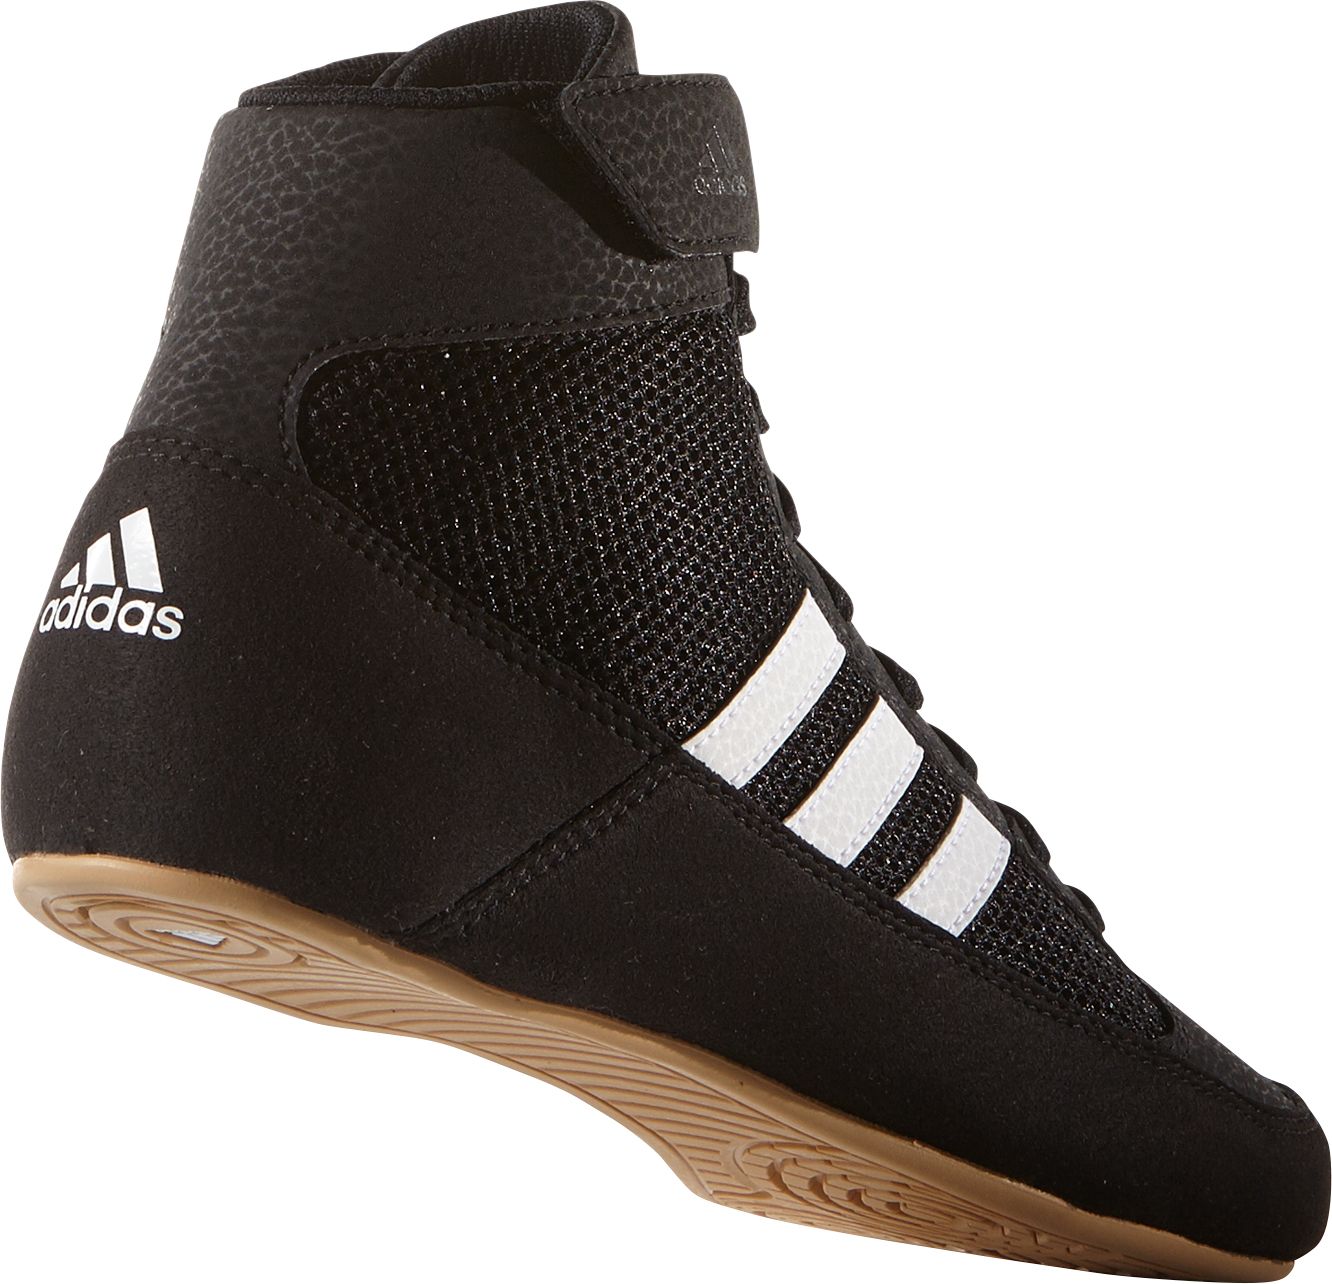 adidas hvc 2 youth wrestling shoes